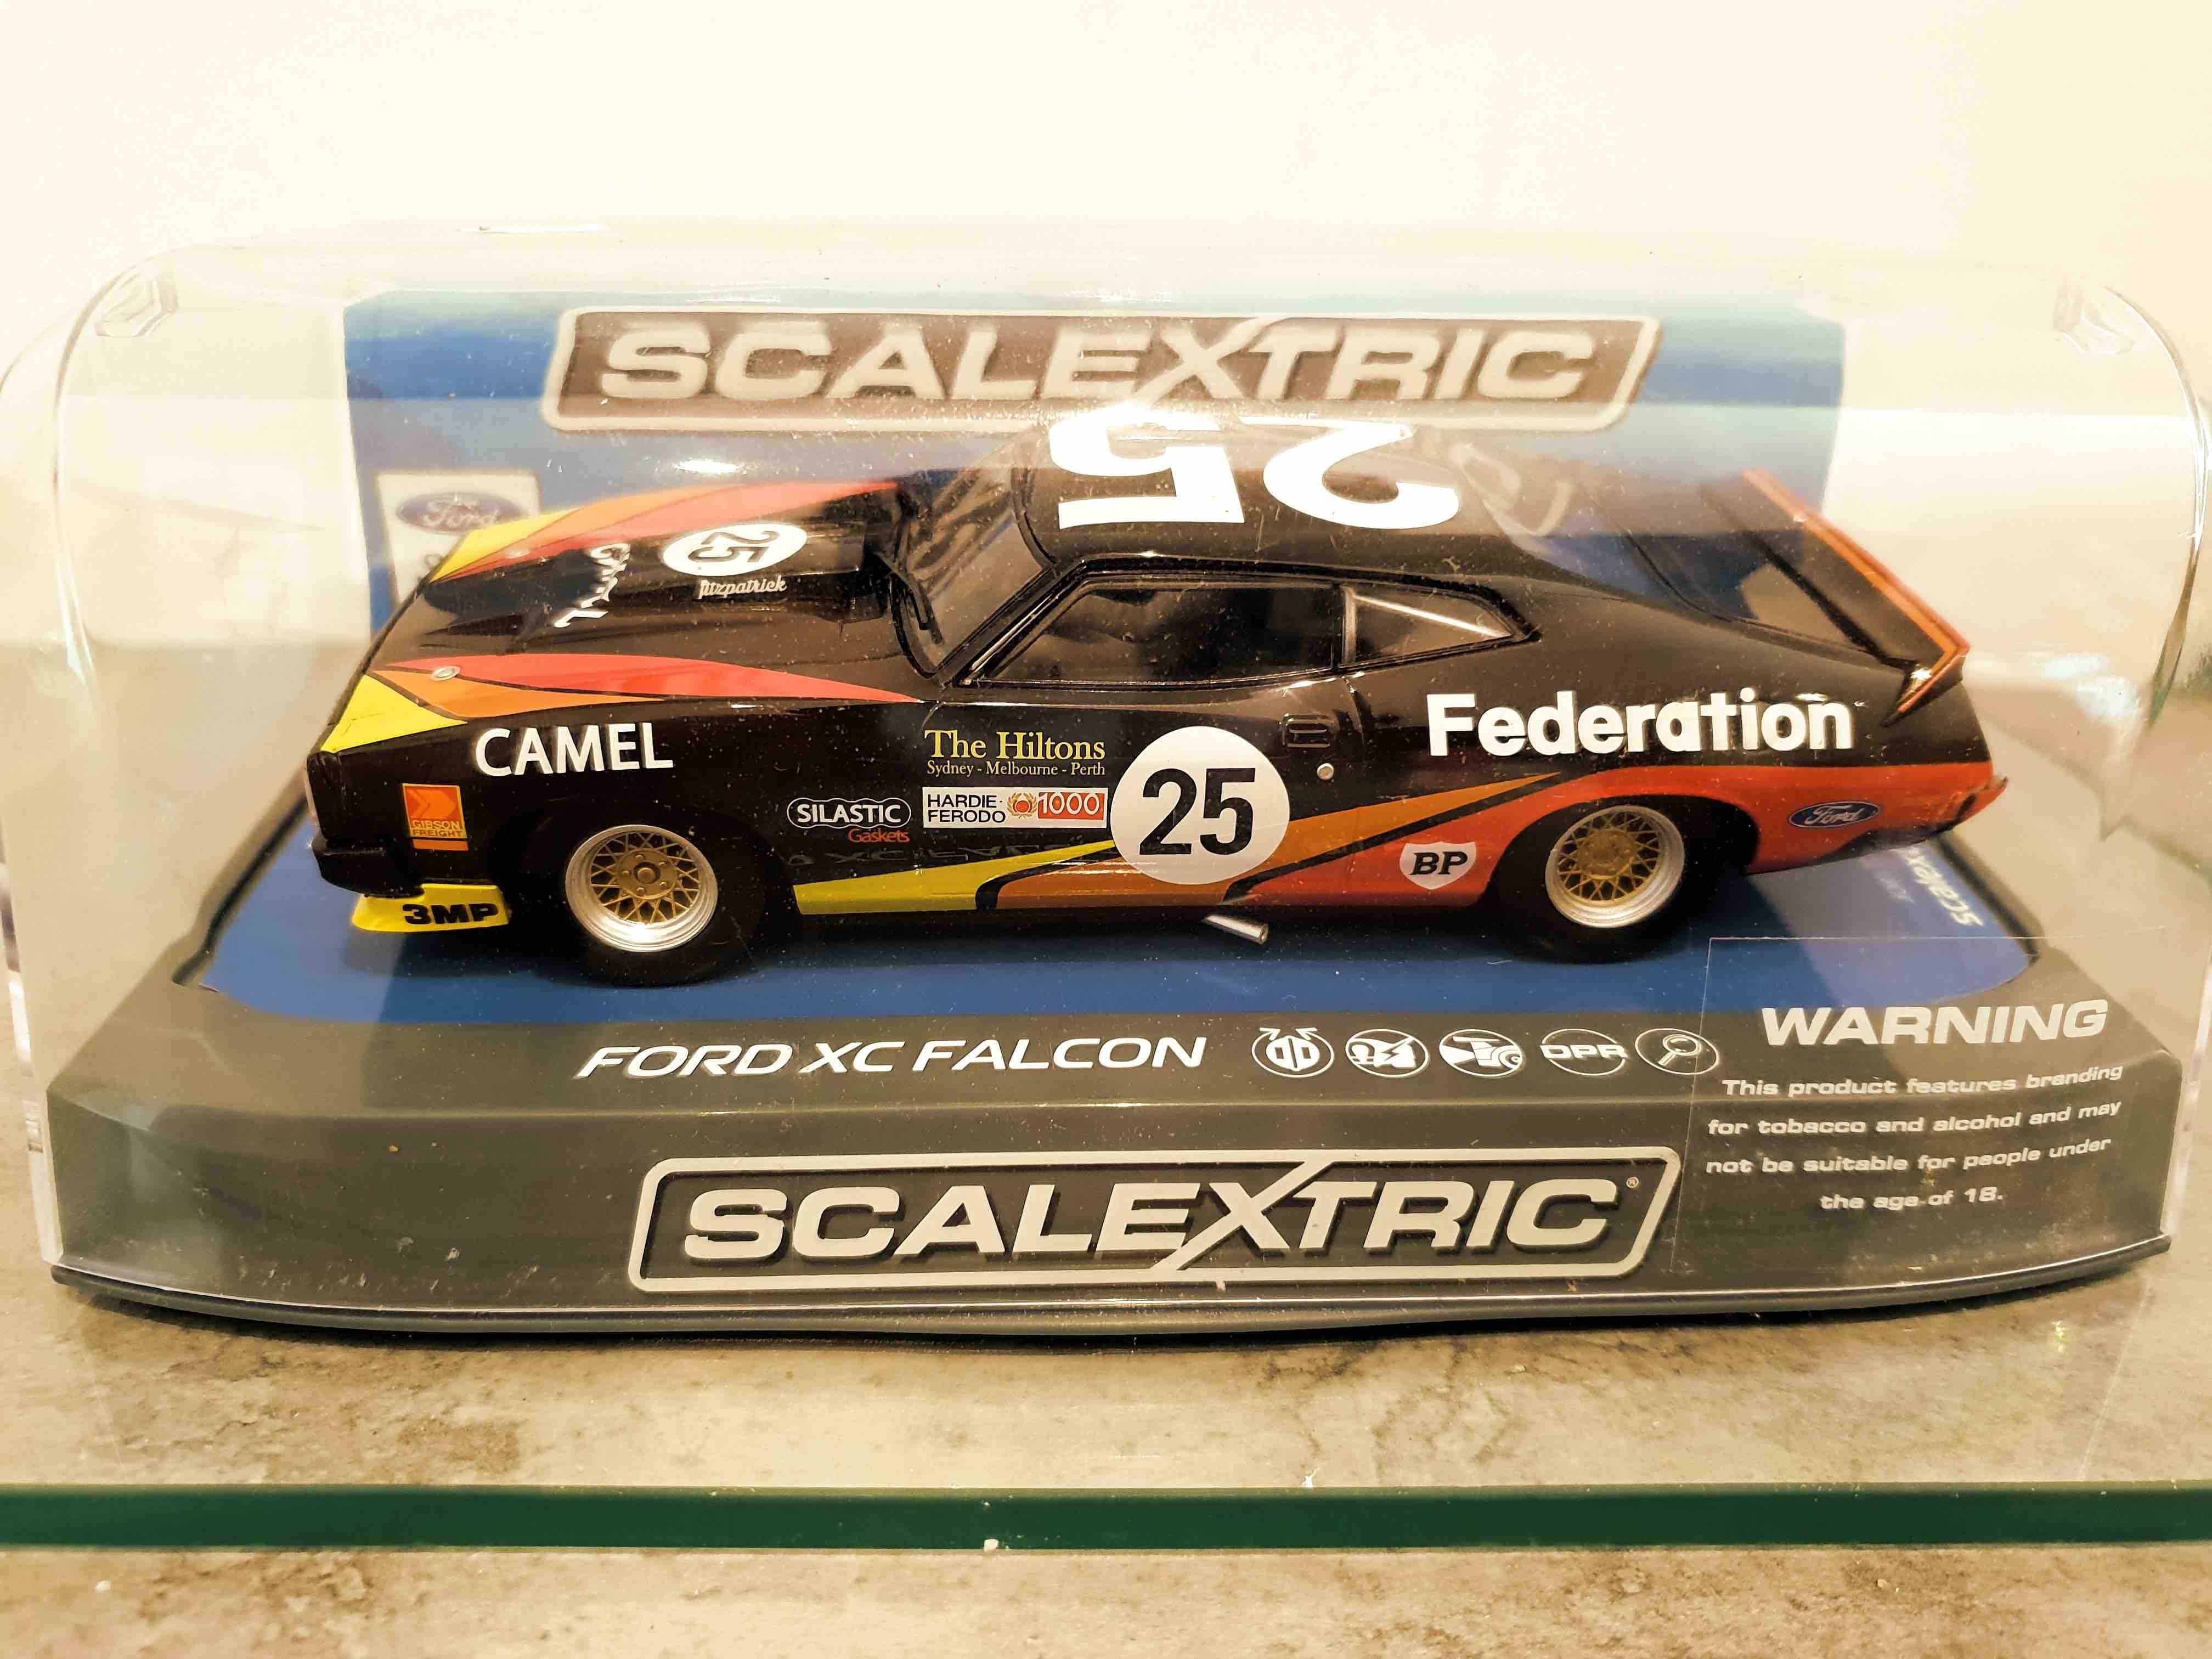 SCALEXTRIC C3869 FORD XC FALCON